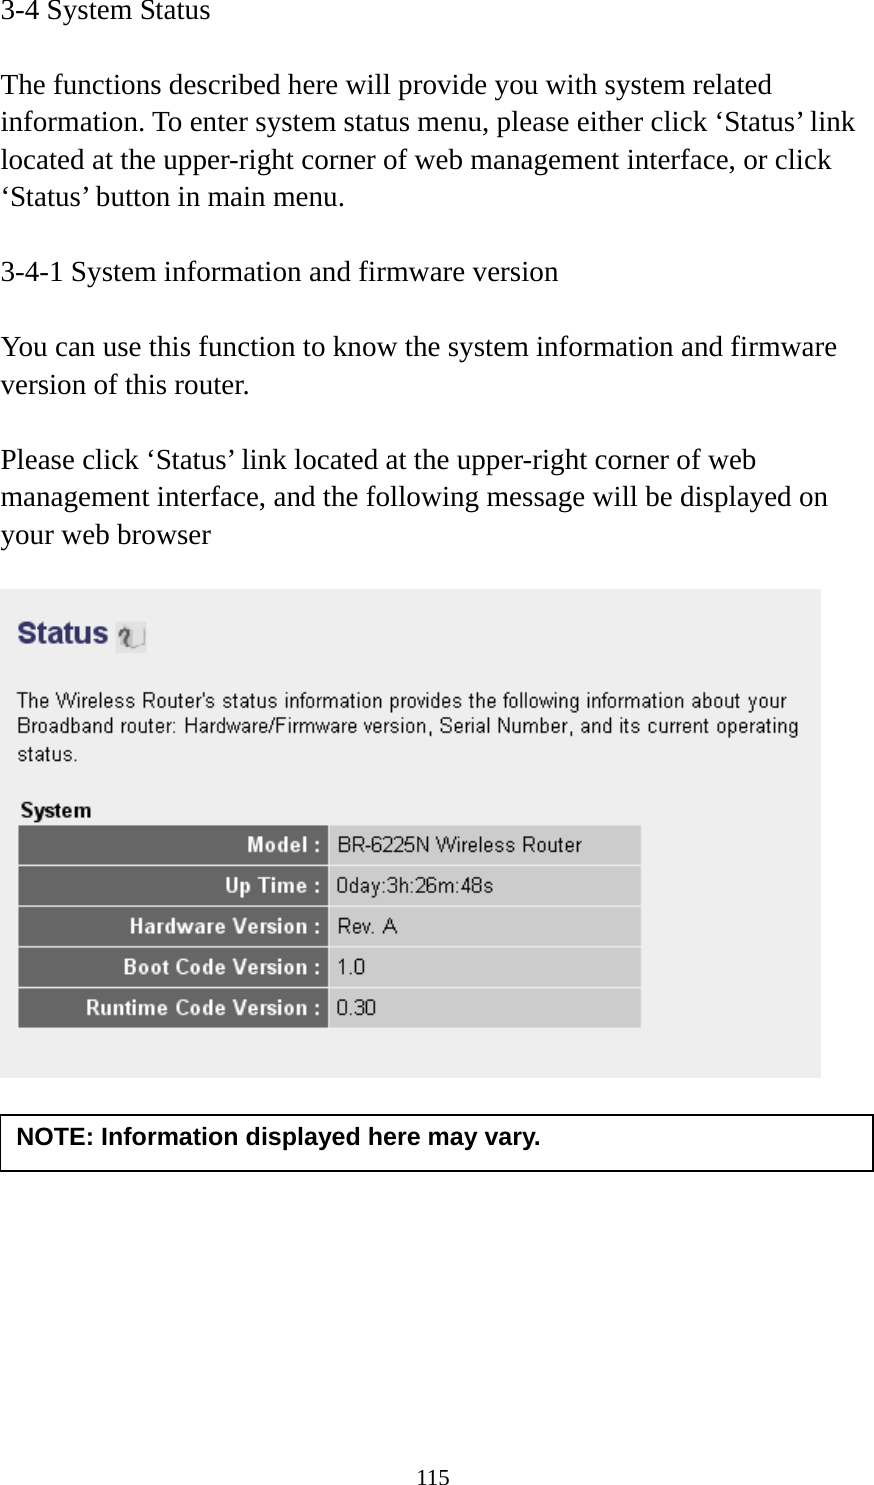 115 3-4 System Status  The functions described here will provide you with system related information. To enter system status menu, please either click ‘Status’ link located at the upper-right corner of web management interface, or click ‘Status’ button in main menu.  3-4-1 System information and firmware version  You can use this function to know the system information and firmware version of this router.  Please click ‘Status’ link located at the upper-right corner of web management interface, and the following message will be displayed on your web browser            NOTE: Information displayed here may vary. 